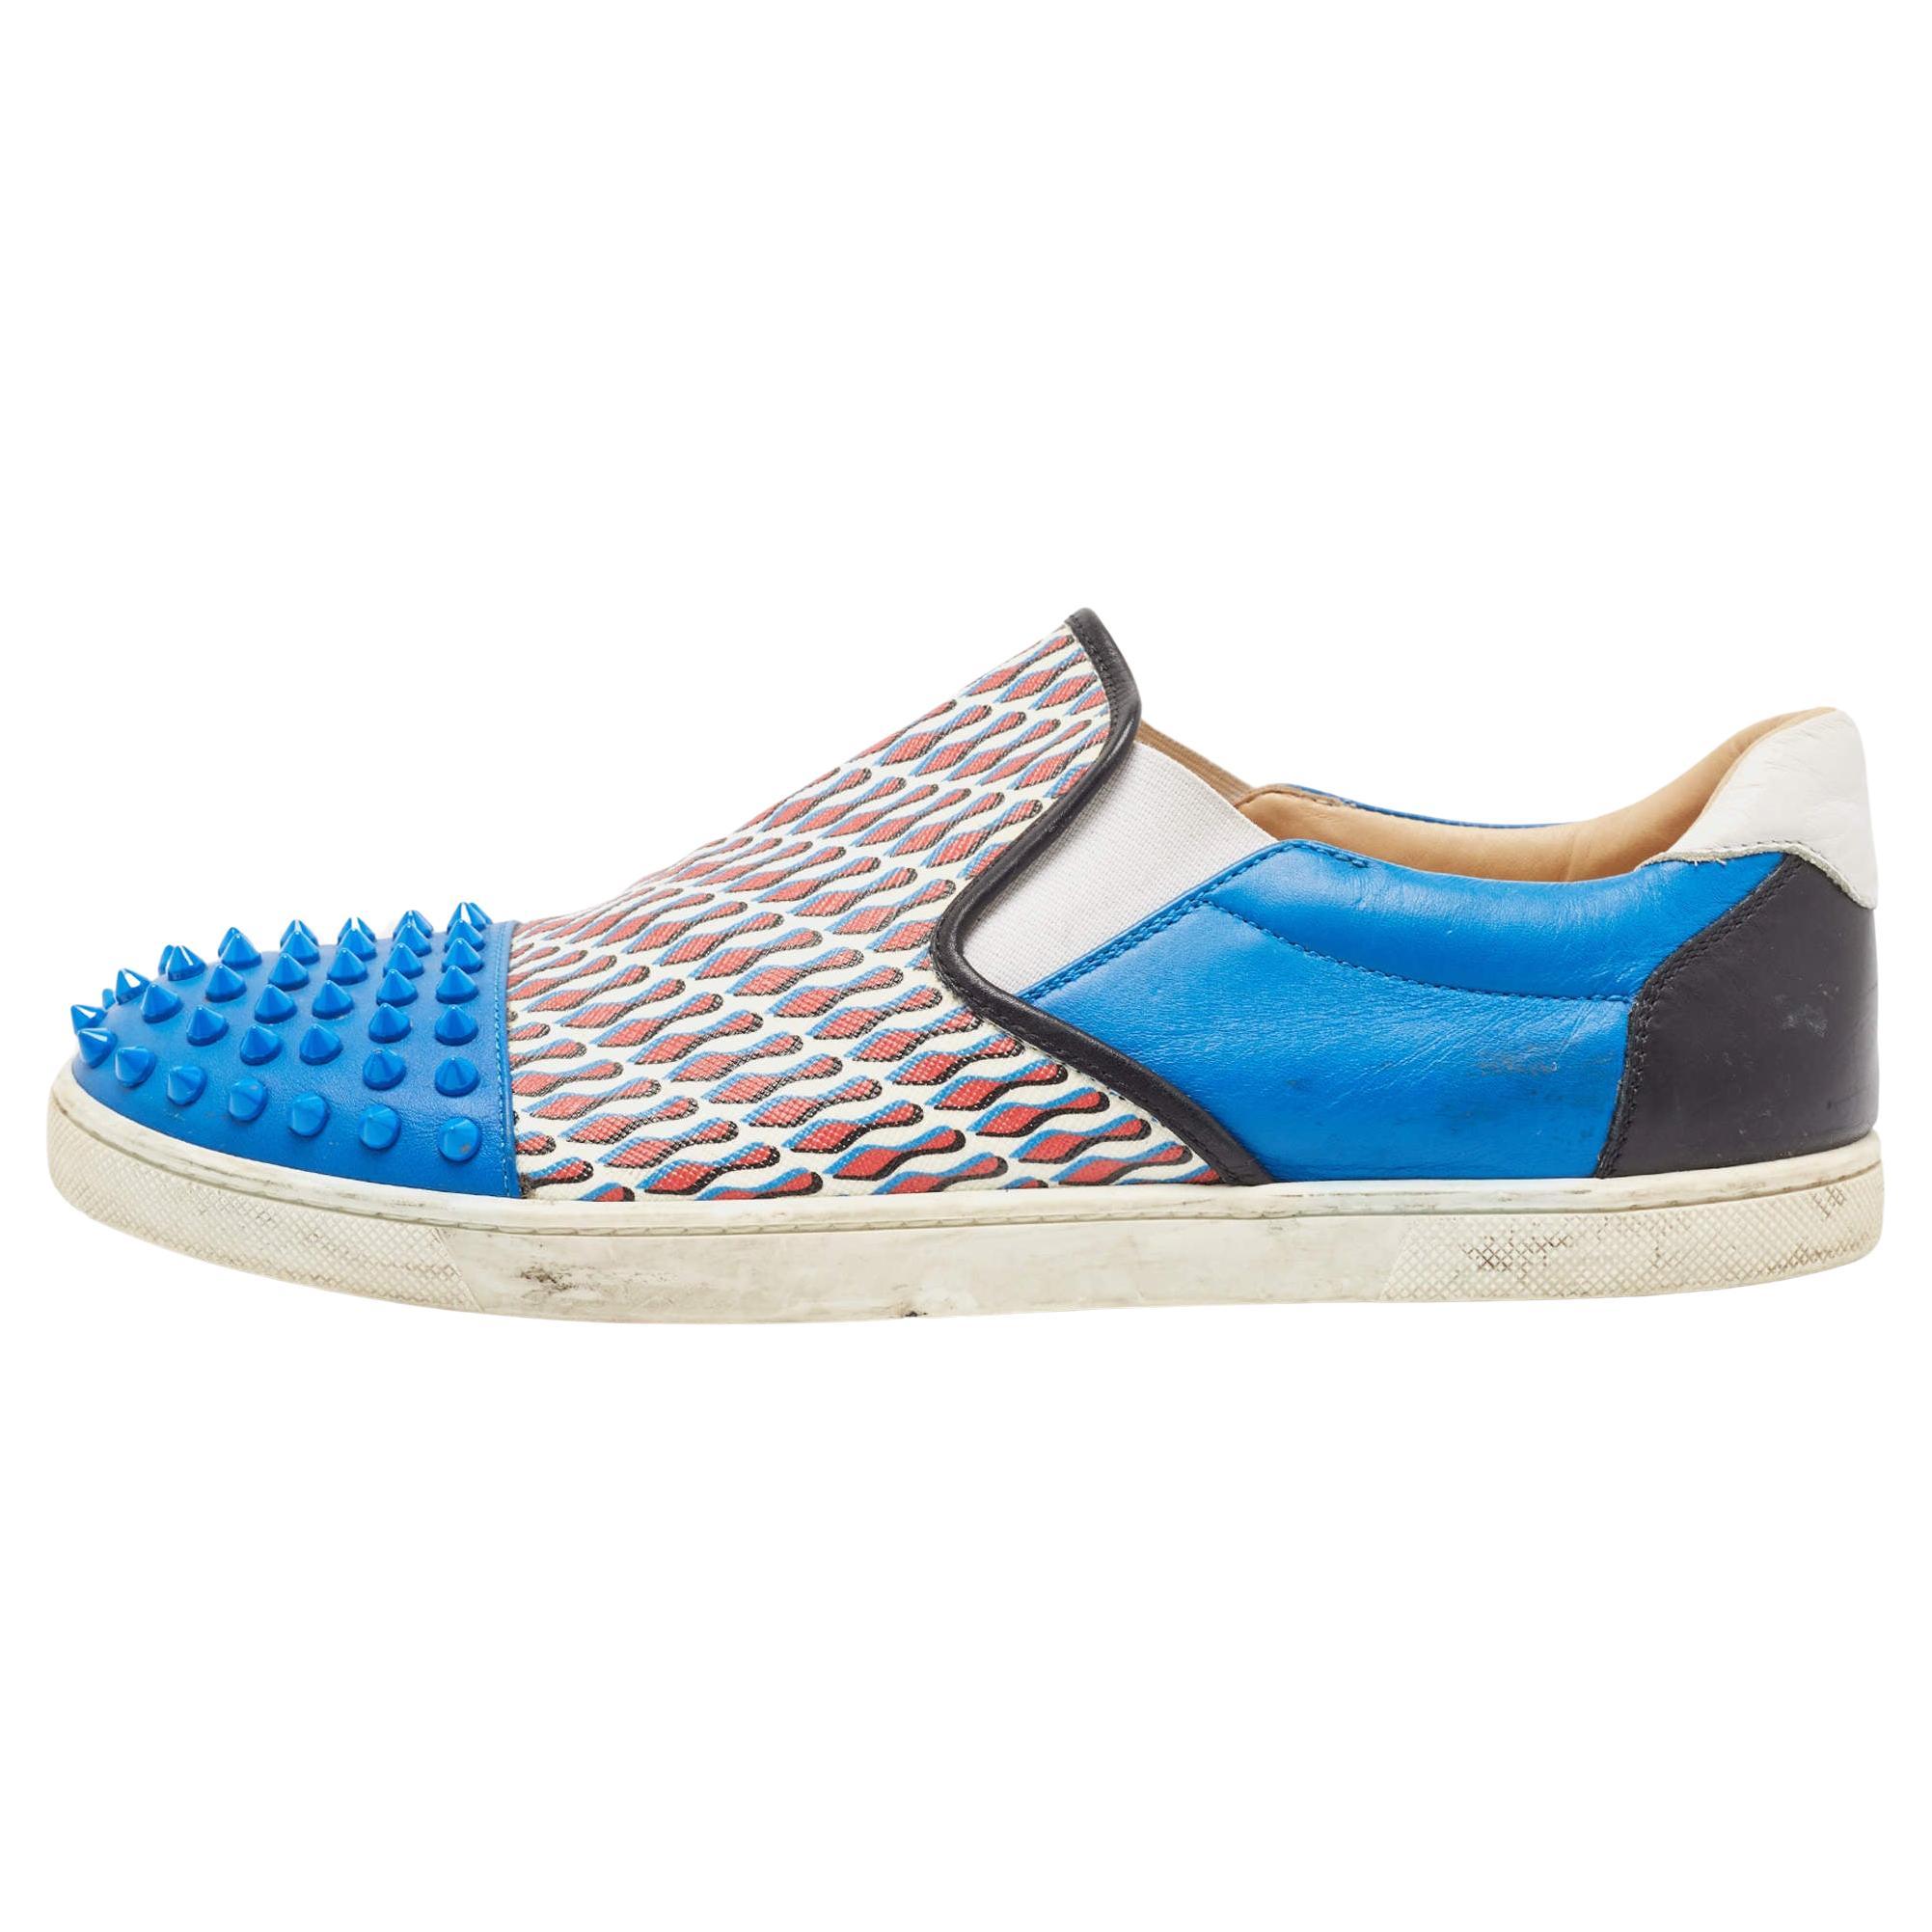 Christian Louboutin Blue Spike Leather and Loubi Print Nazapunta Skate Sneakers  For Sale